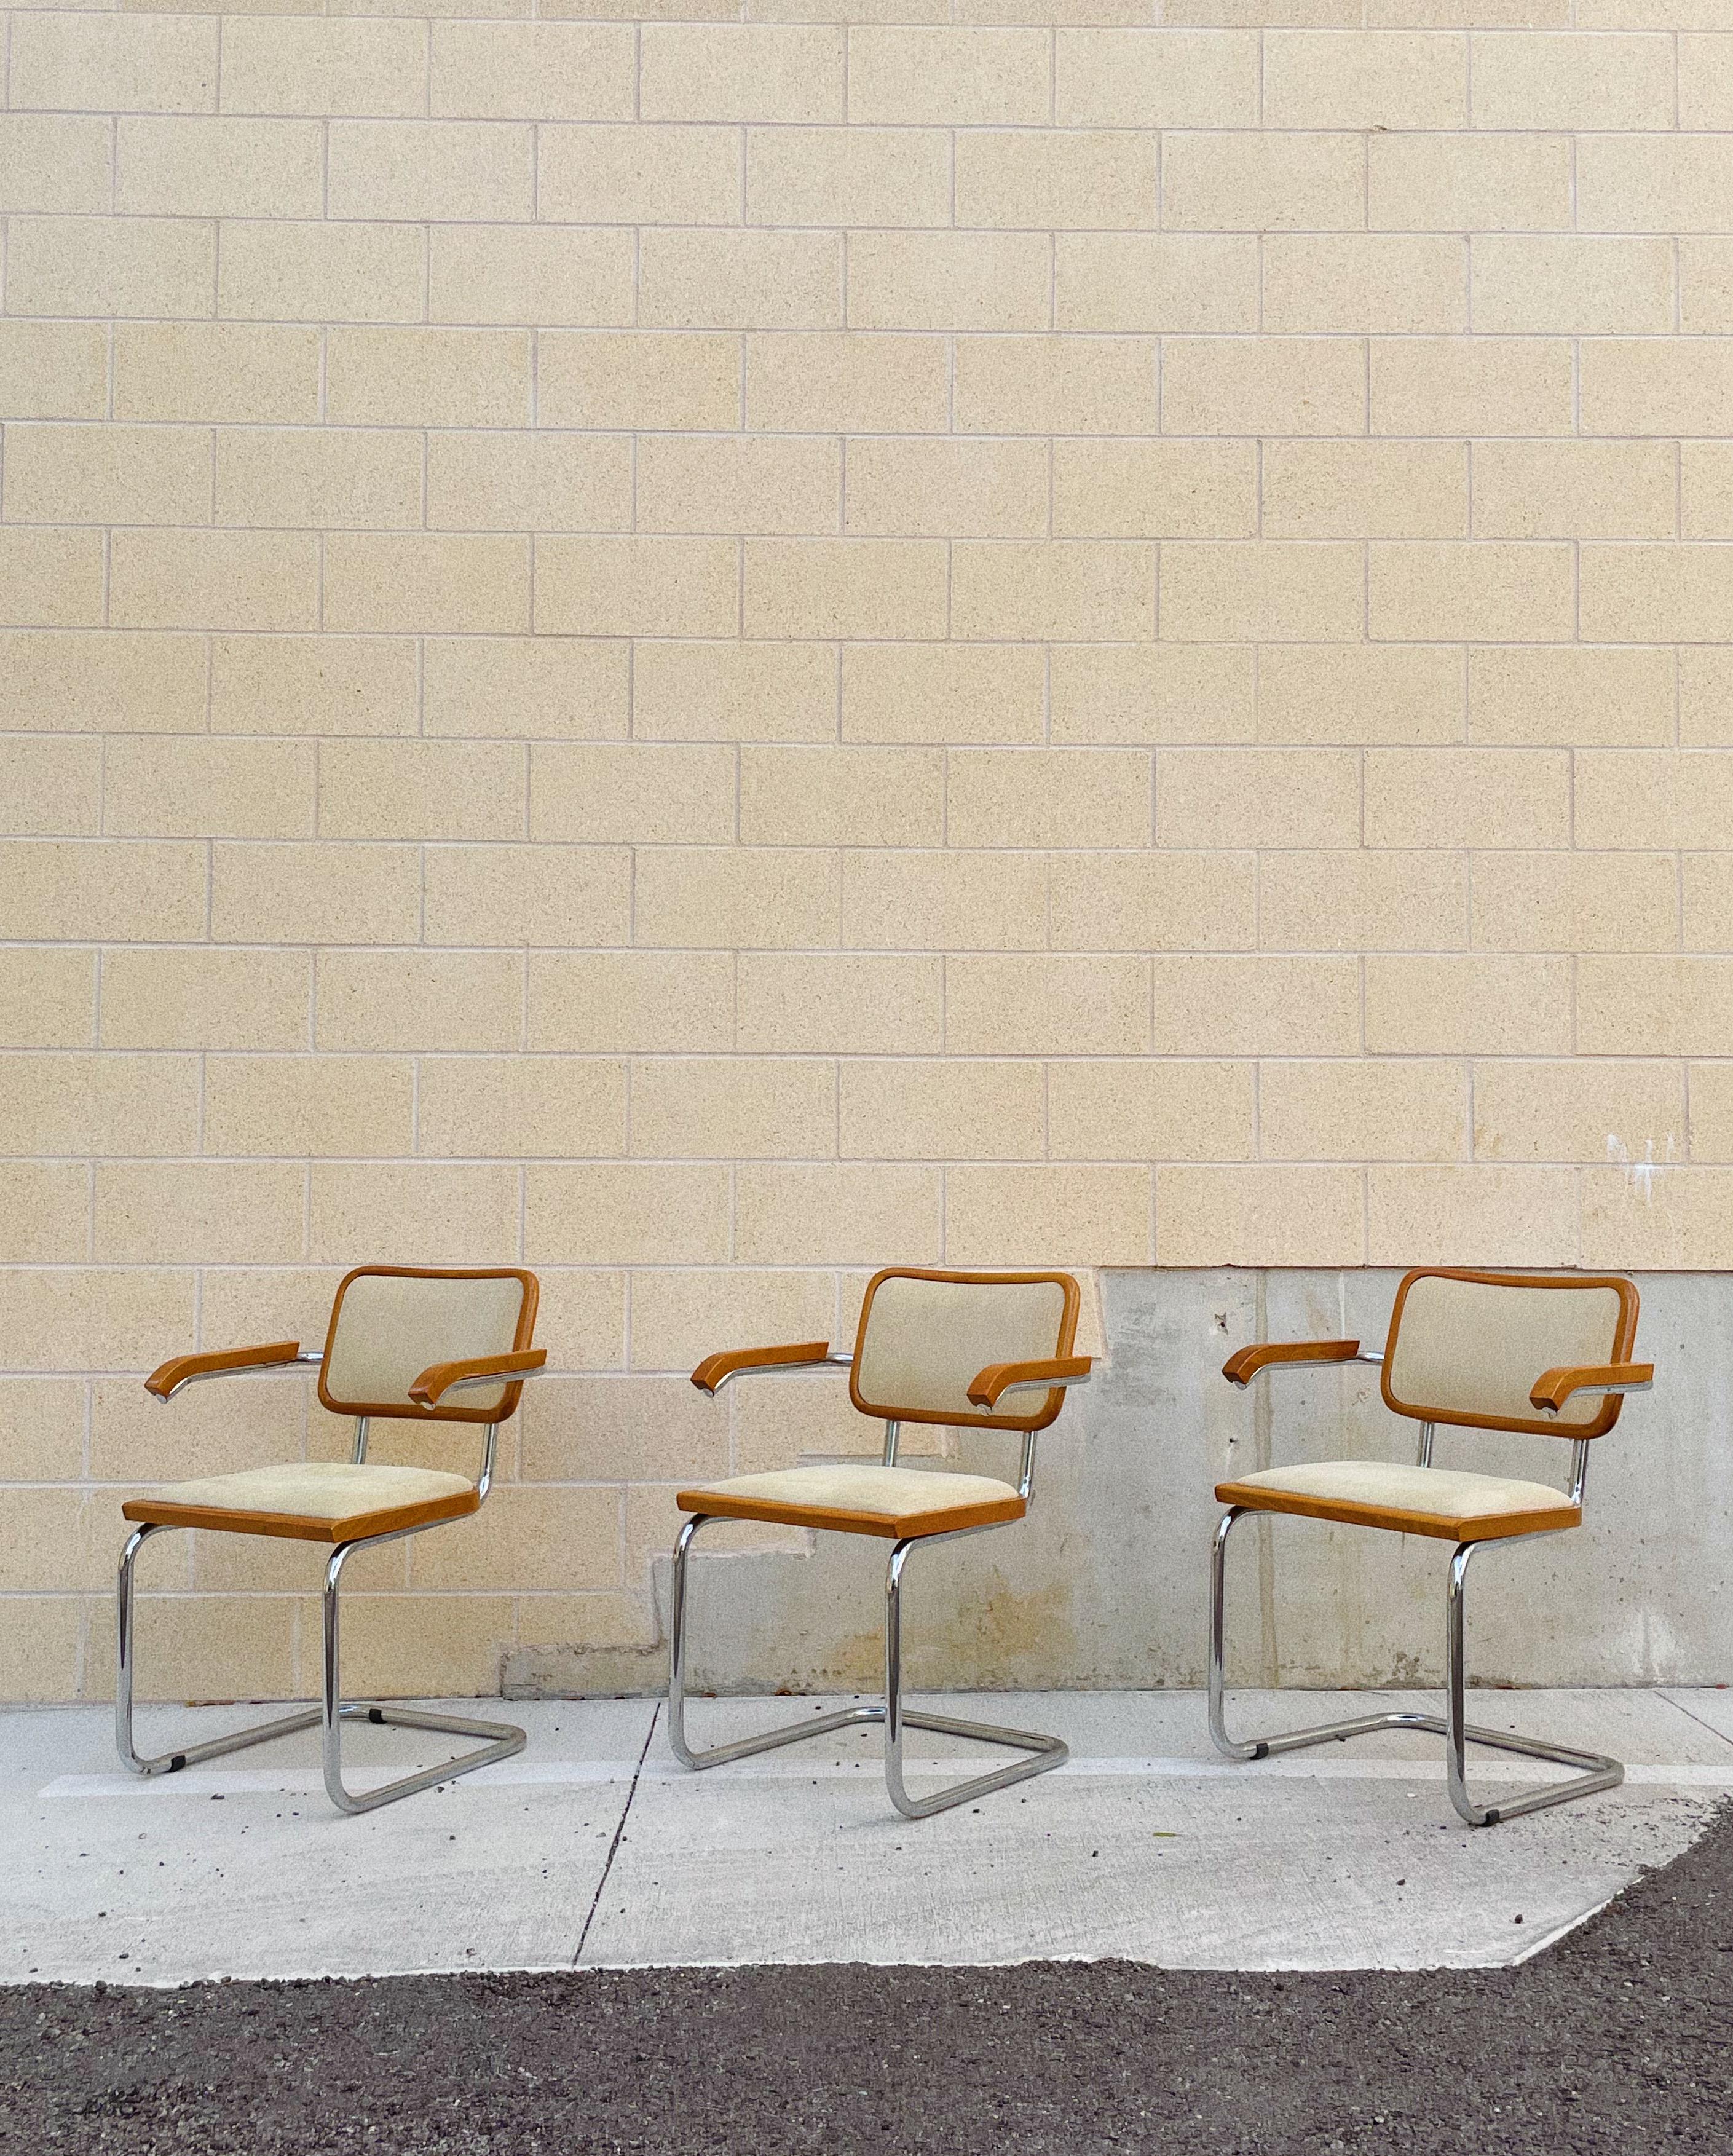 Upholstered Cesca Chairs after Marcel Breuer for Knoll; Made in Italy. Upholstered in a cream colored woven fabric with blue, peach weaving throughout.